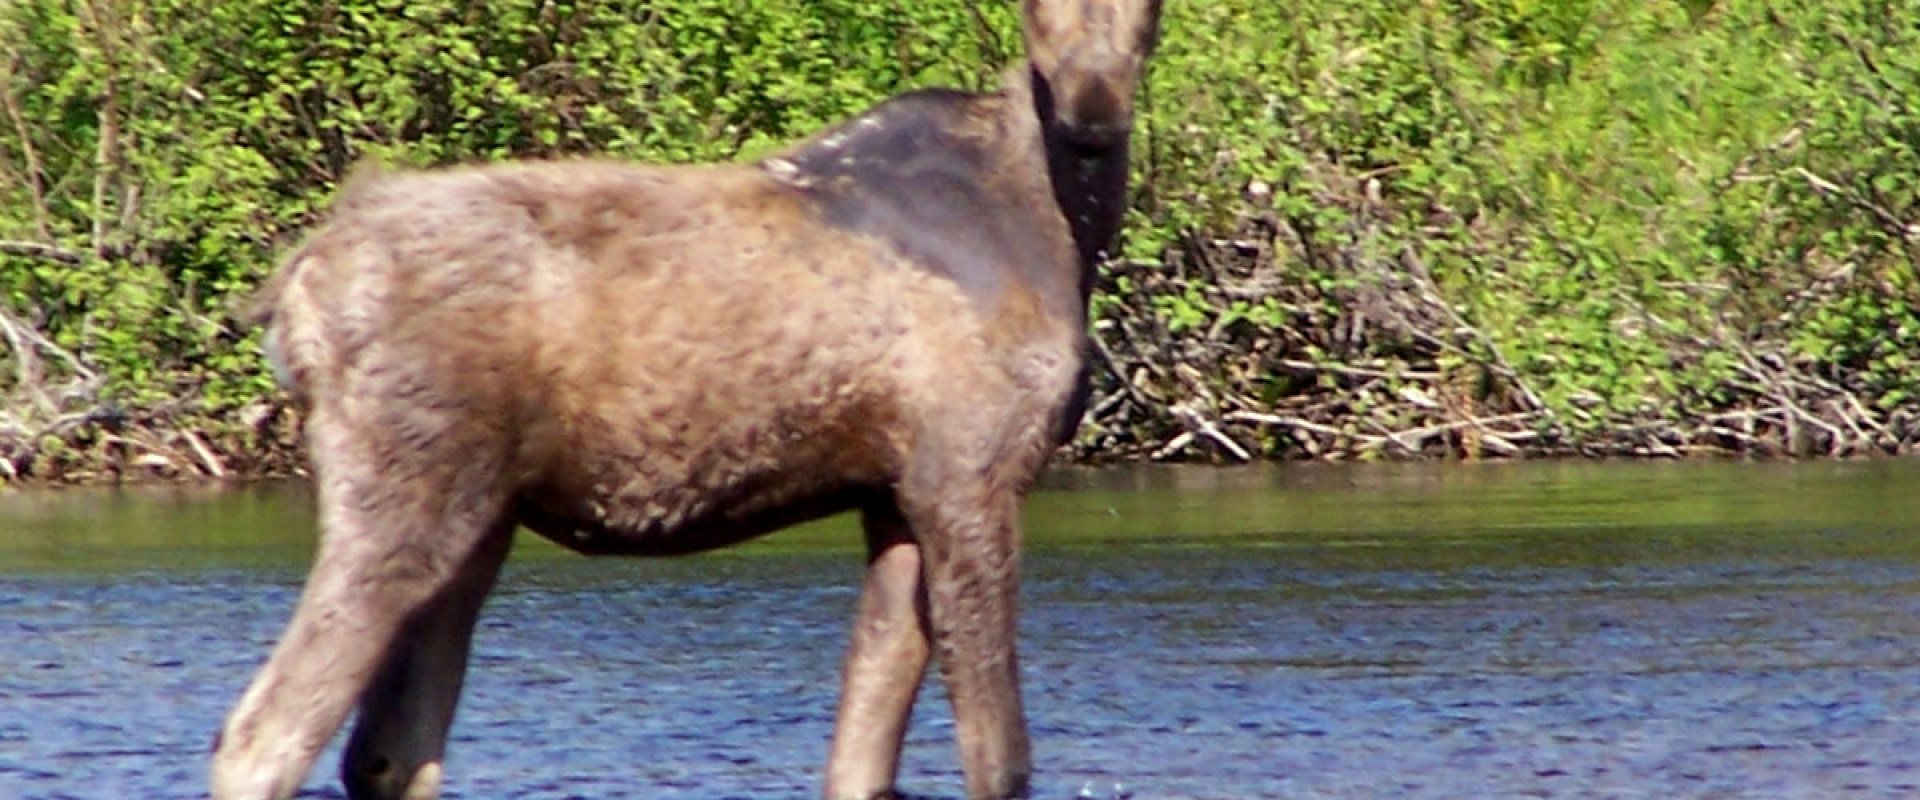 A young moose looking towards the camera, wading in a forested area of the St. Croix River near Grassy Islands. 